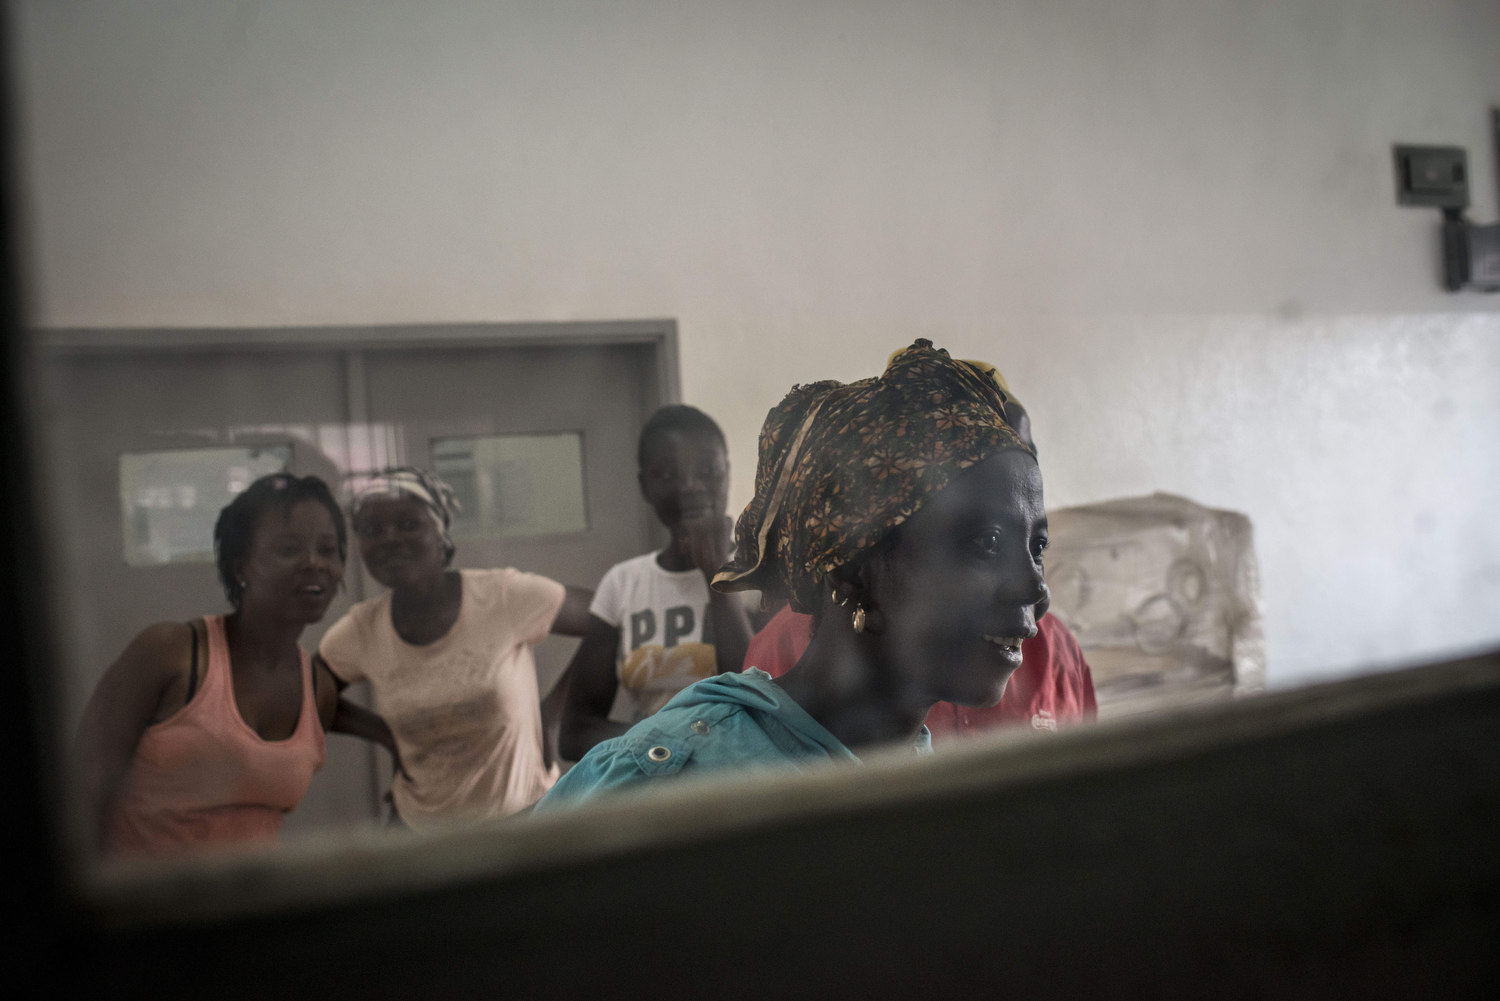  Family members peer into the delivery room at Kenema Government hospital to see how the mothers are faring in Kenema, Sierra Leone on November 10th, 2015.  